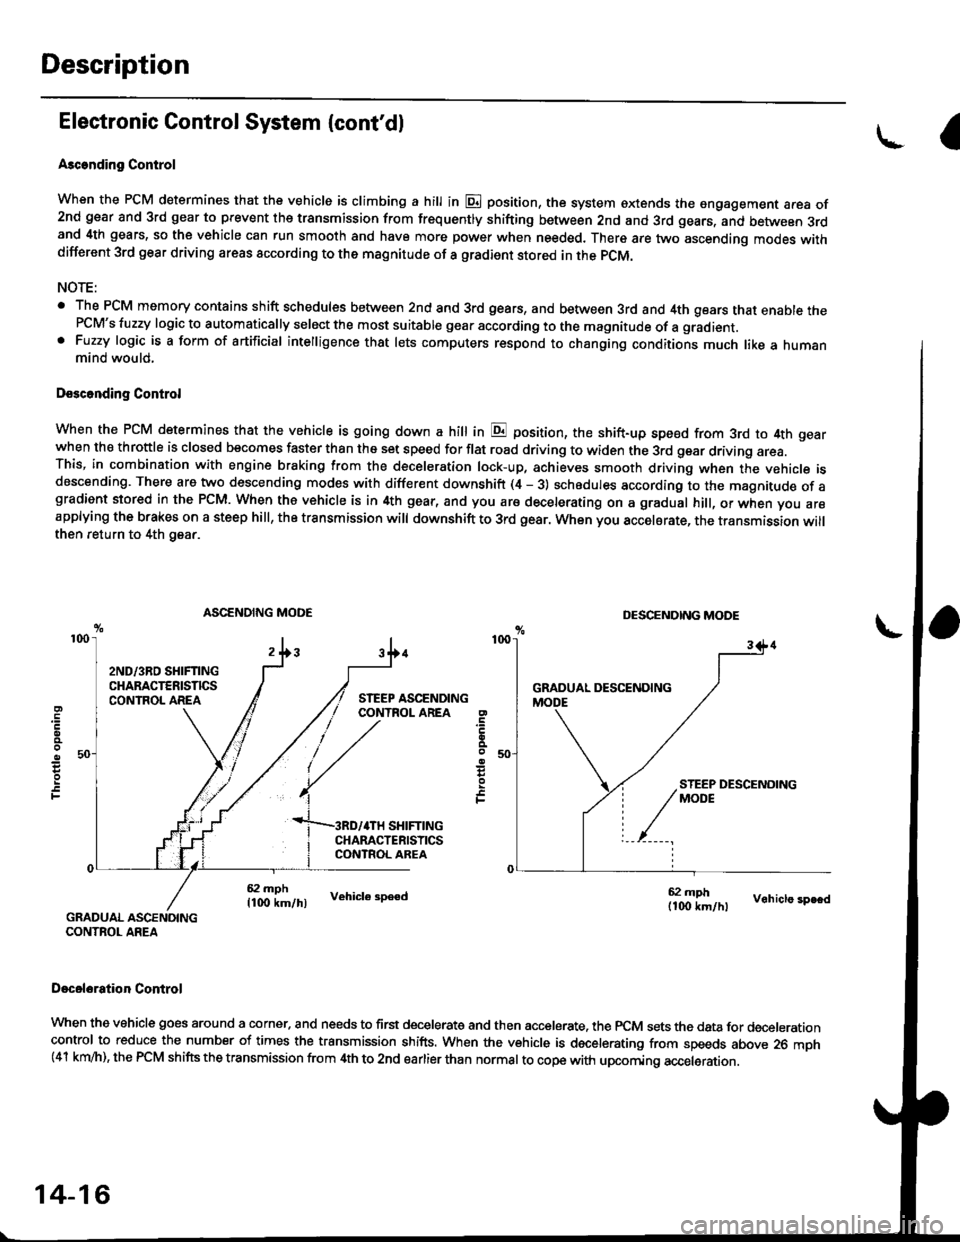 HONDA CIVIC 1998 6.G Workshop Manual Description
Electronic Control System {contdl
Ascending Control
When the PCM determines that the vehicle is climbing a hill in E position, the system oxtends the sngagement area of2nd gear and 3rd ge